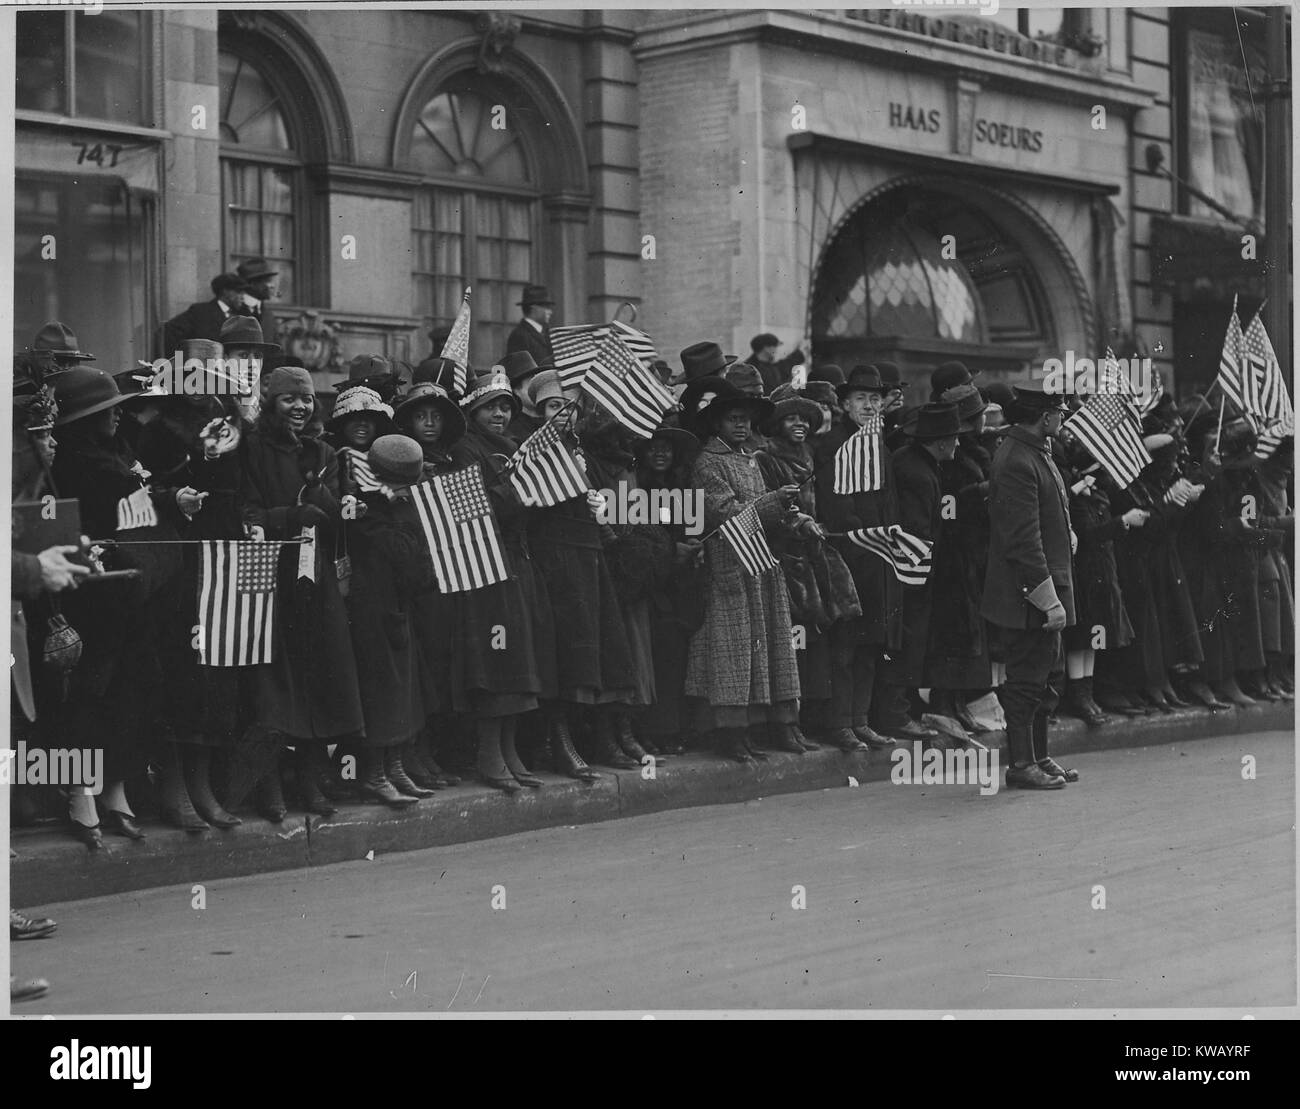 Smiling and waving United States flags while crowded on the sidewalk of the street, onlookers dressed in coats and hats await the parade of the famous 369th African American Infantry, formerly the 15th New York regulars, New York, New York, 1917. Image courtesy National Archives. Stock Photo